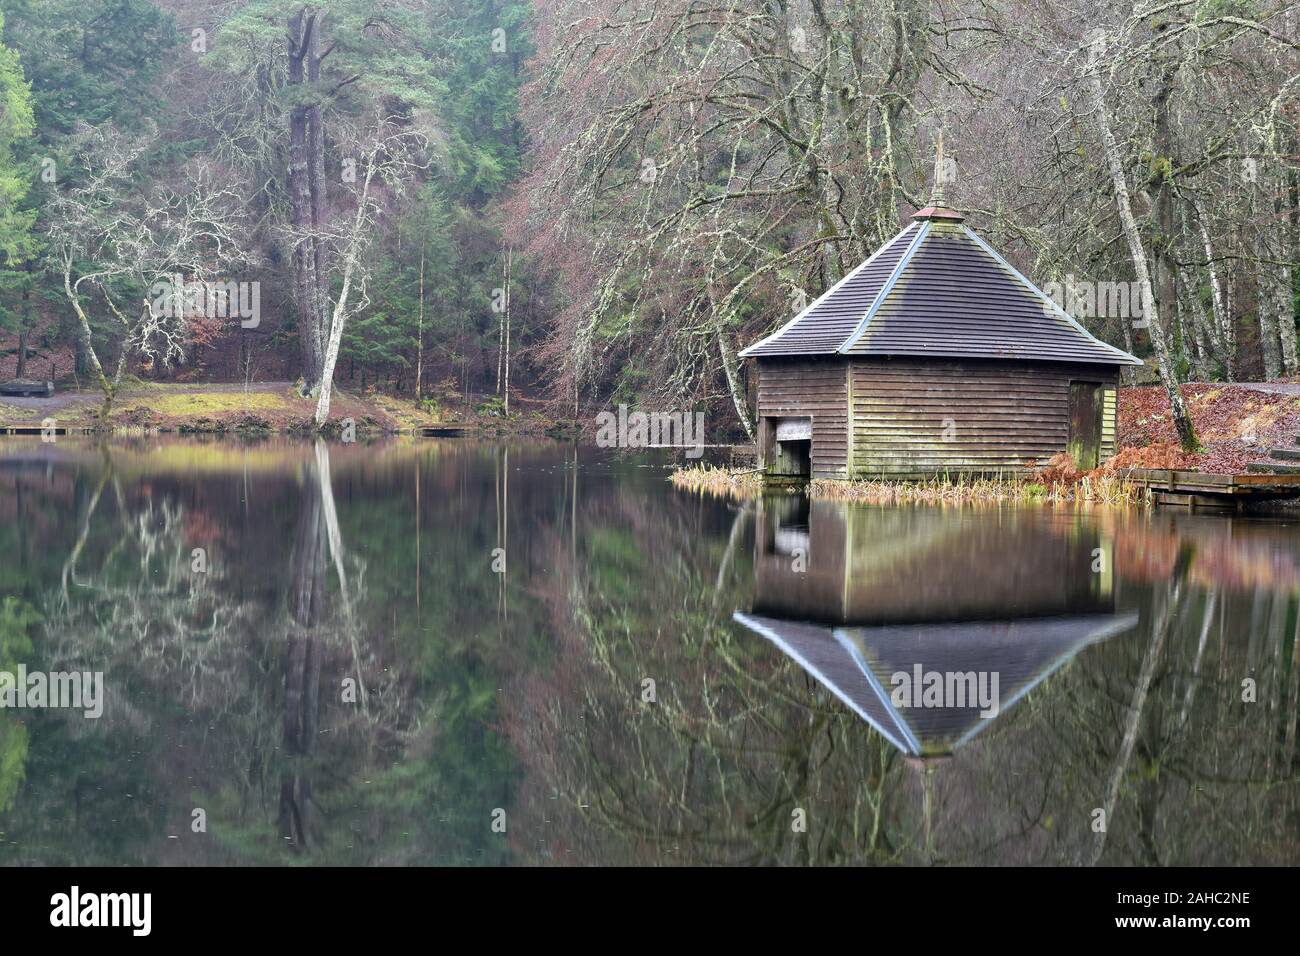 Loch Dunmore near Pitlochry in Perthshire, Scotland. Boathouse and trees reflected perfectly in calm waters of the loch. Taken in winter. Stock Photo